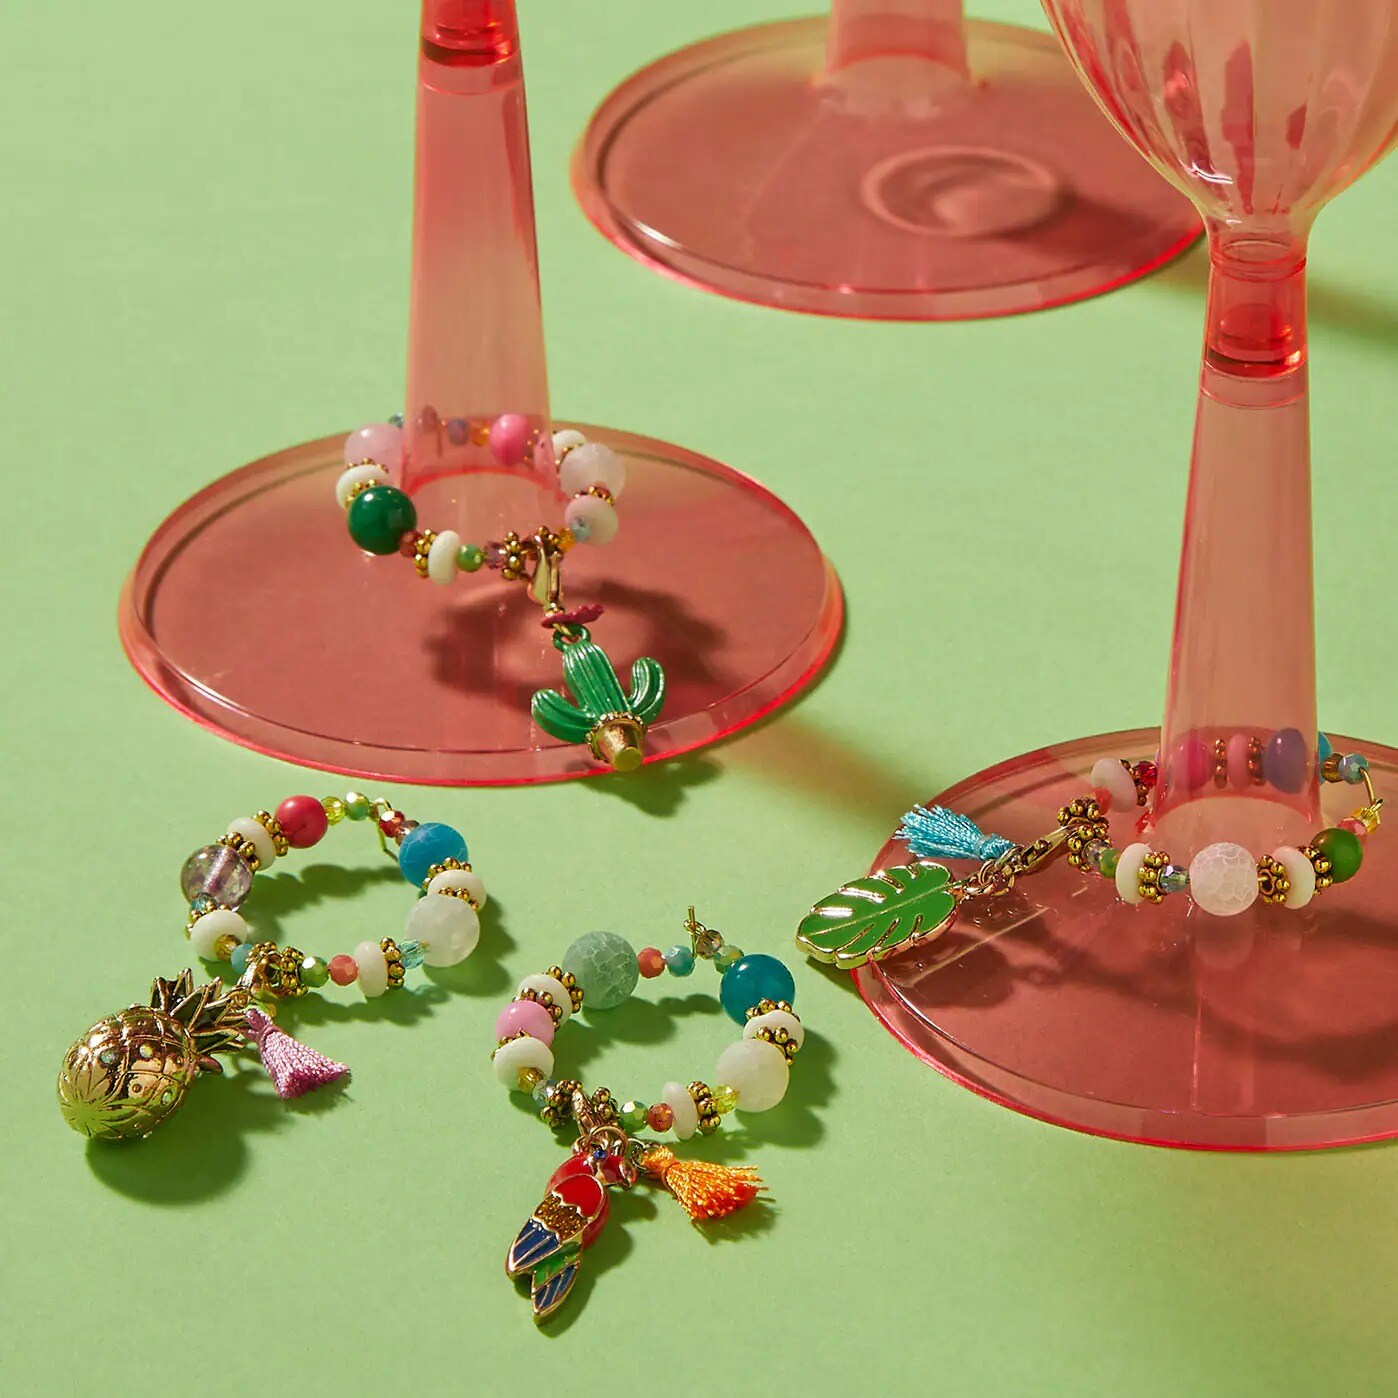 tropical beads in circles around stem glasses